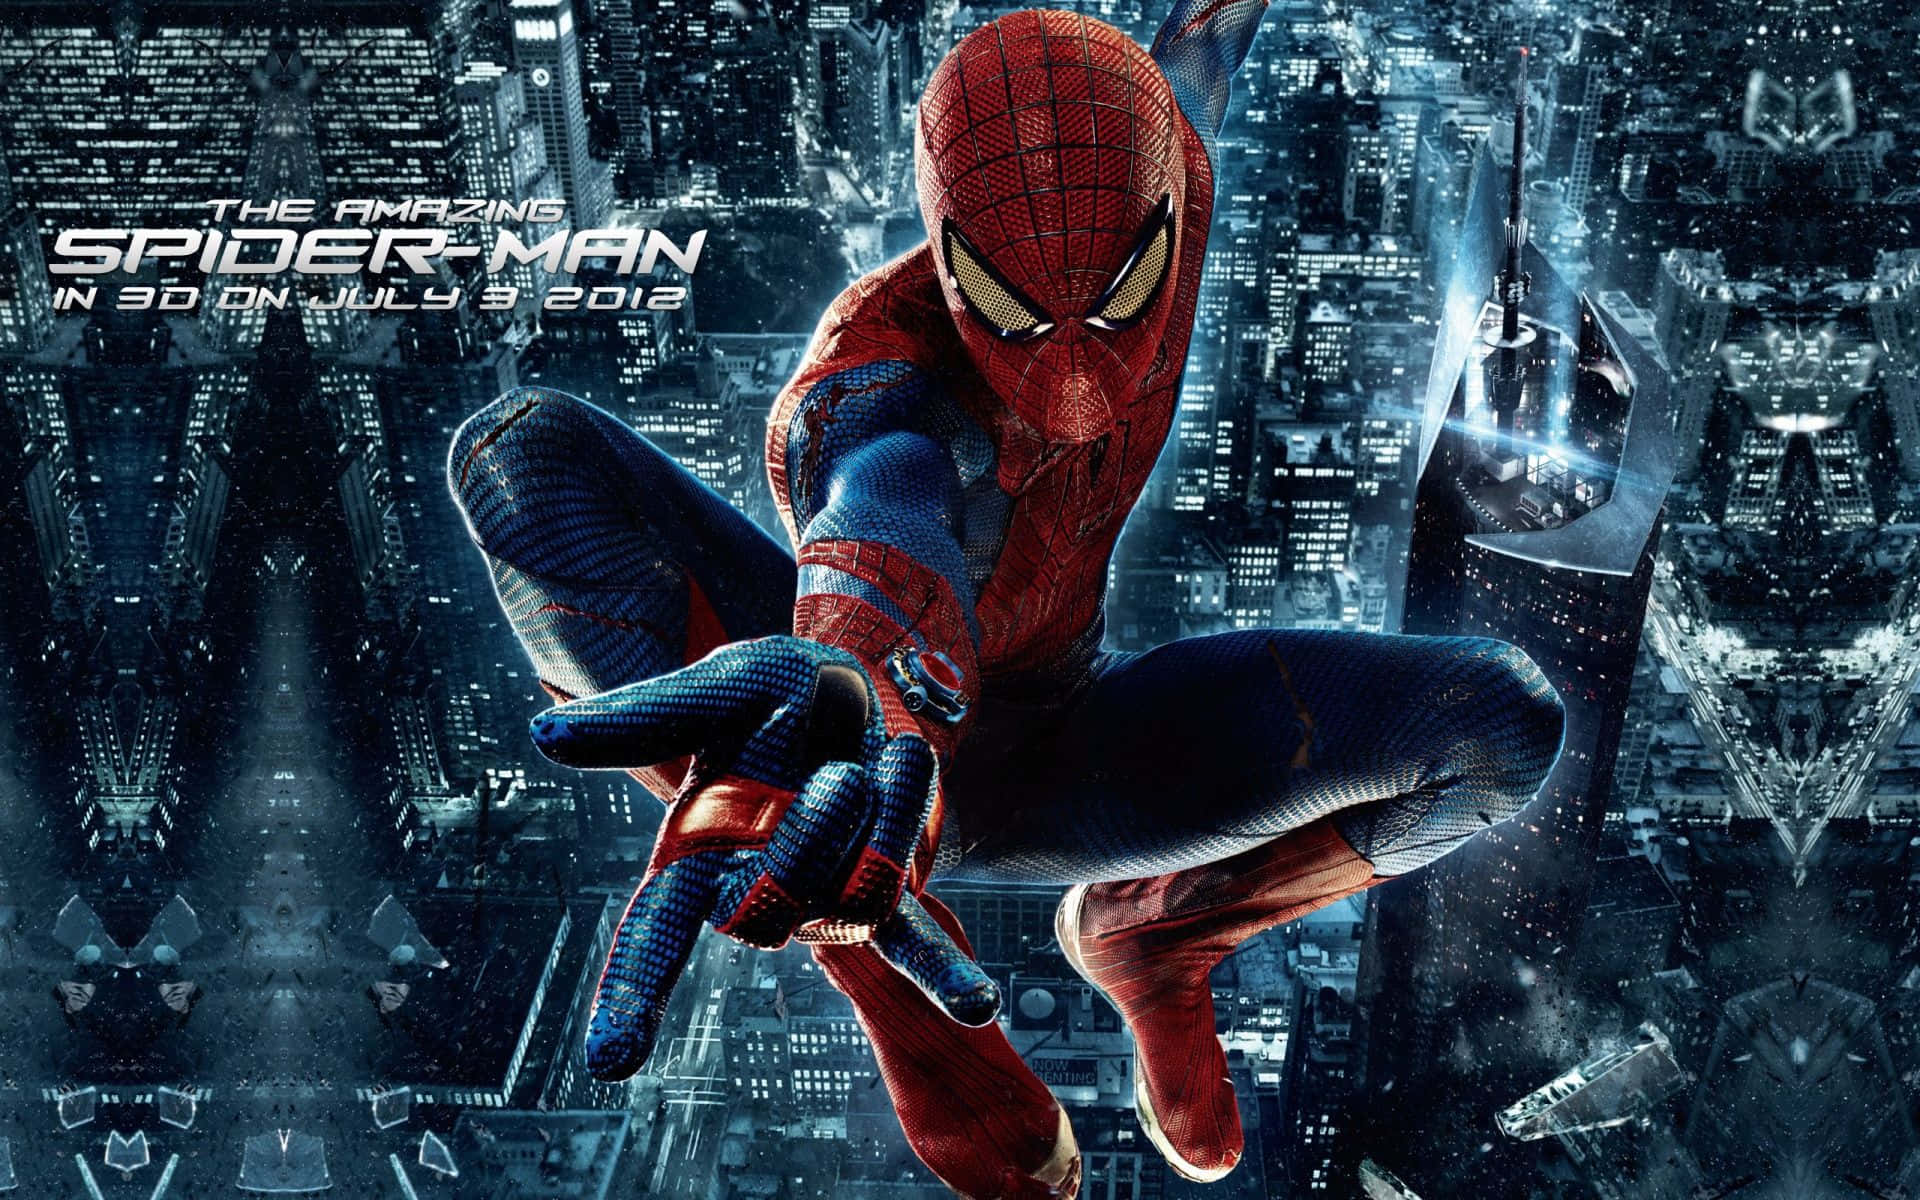 The Best Spider-Man Comes in Many Forms" Wallpaper